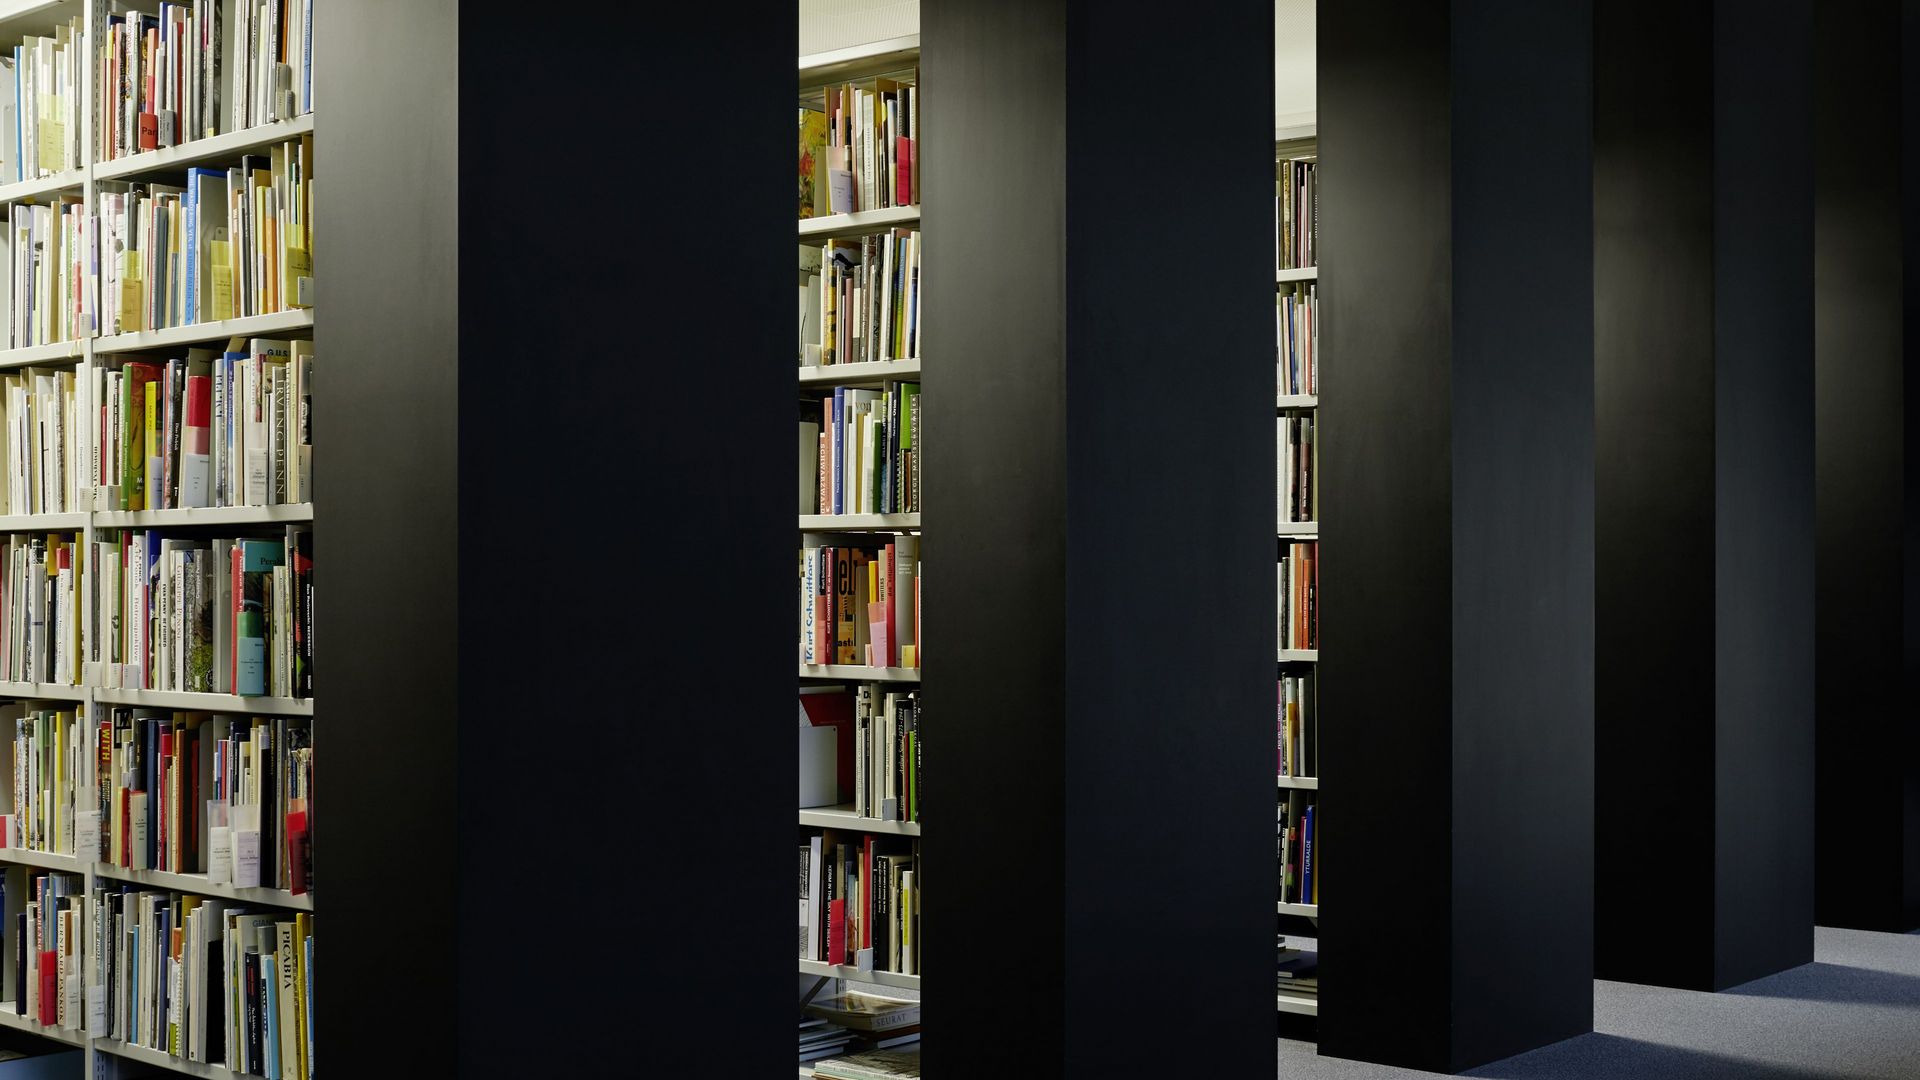 Photo: Parallel floor-to-ceiling shelves with books.